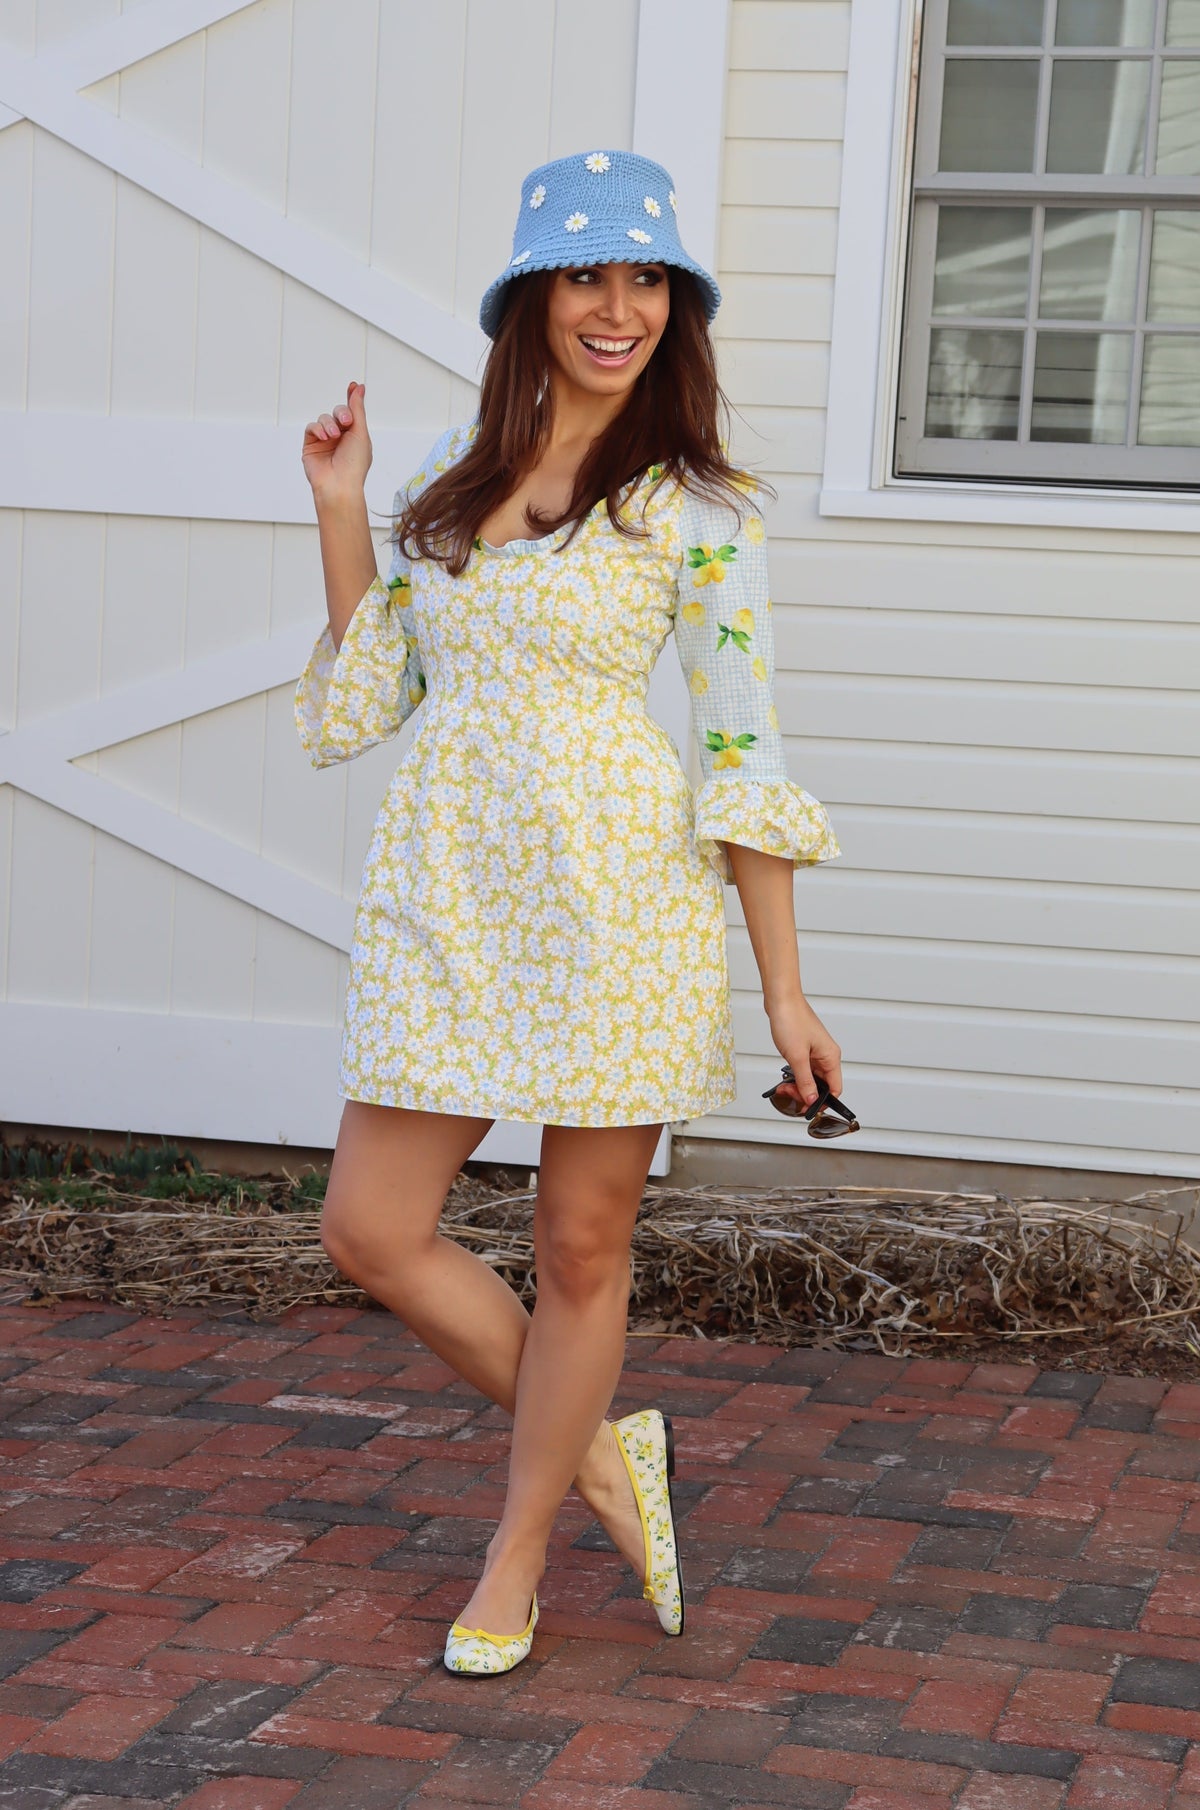 Model in bucket hat with daisies wearing  Sweet Caroline Dress which combines a yellow daisy print with a light blue lemon print.